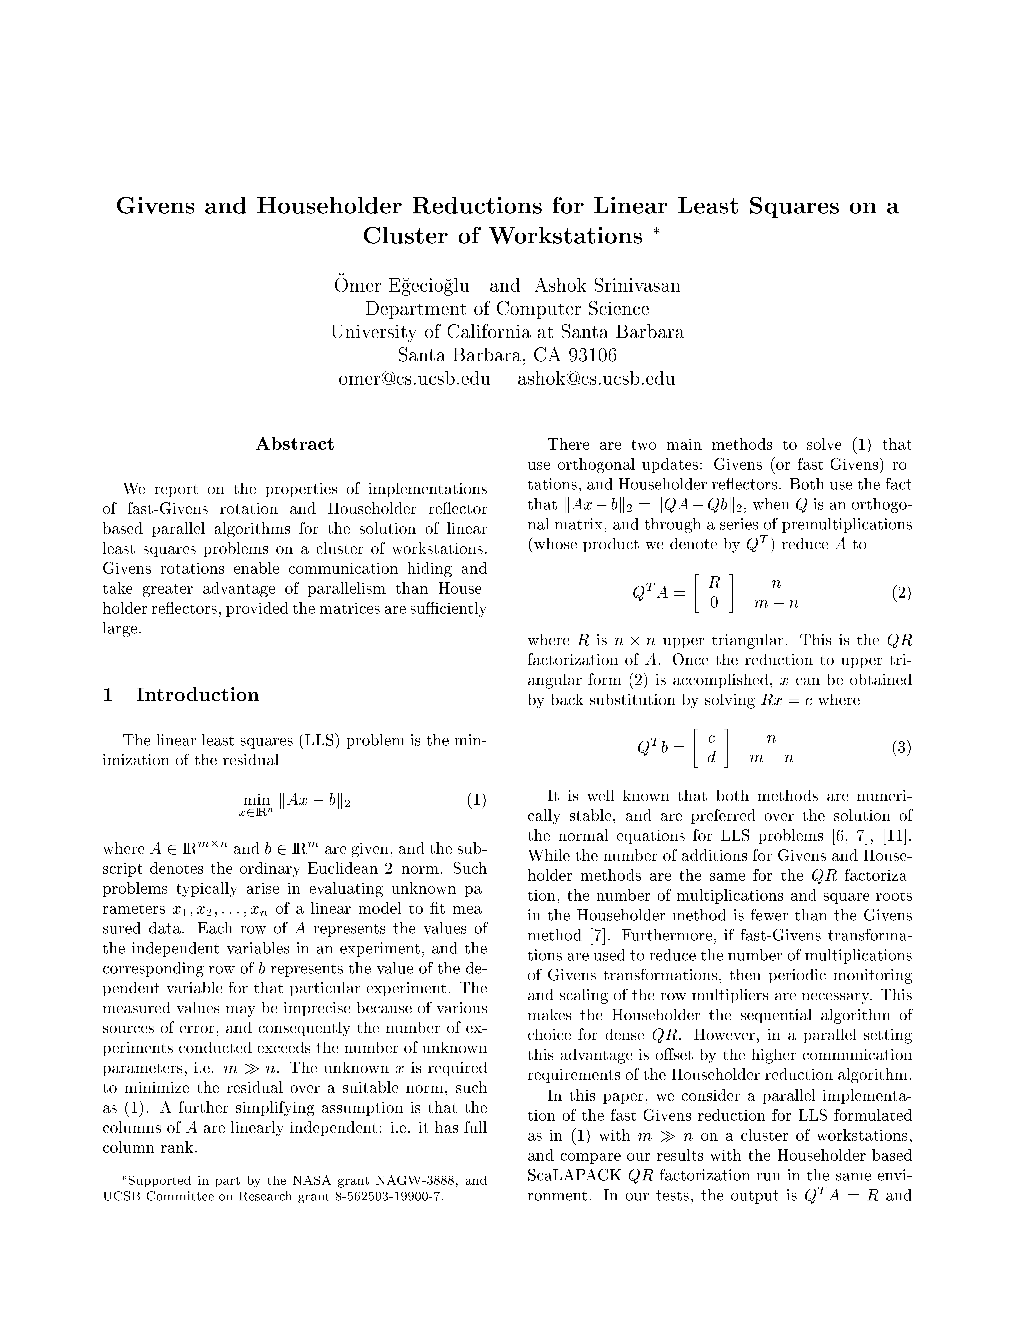 Givens and Householder Reductions for Linear Least Squares on A